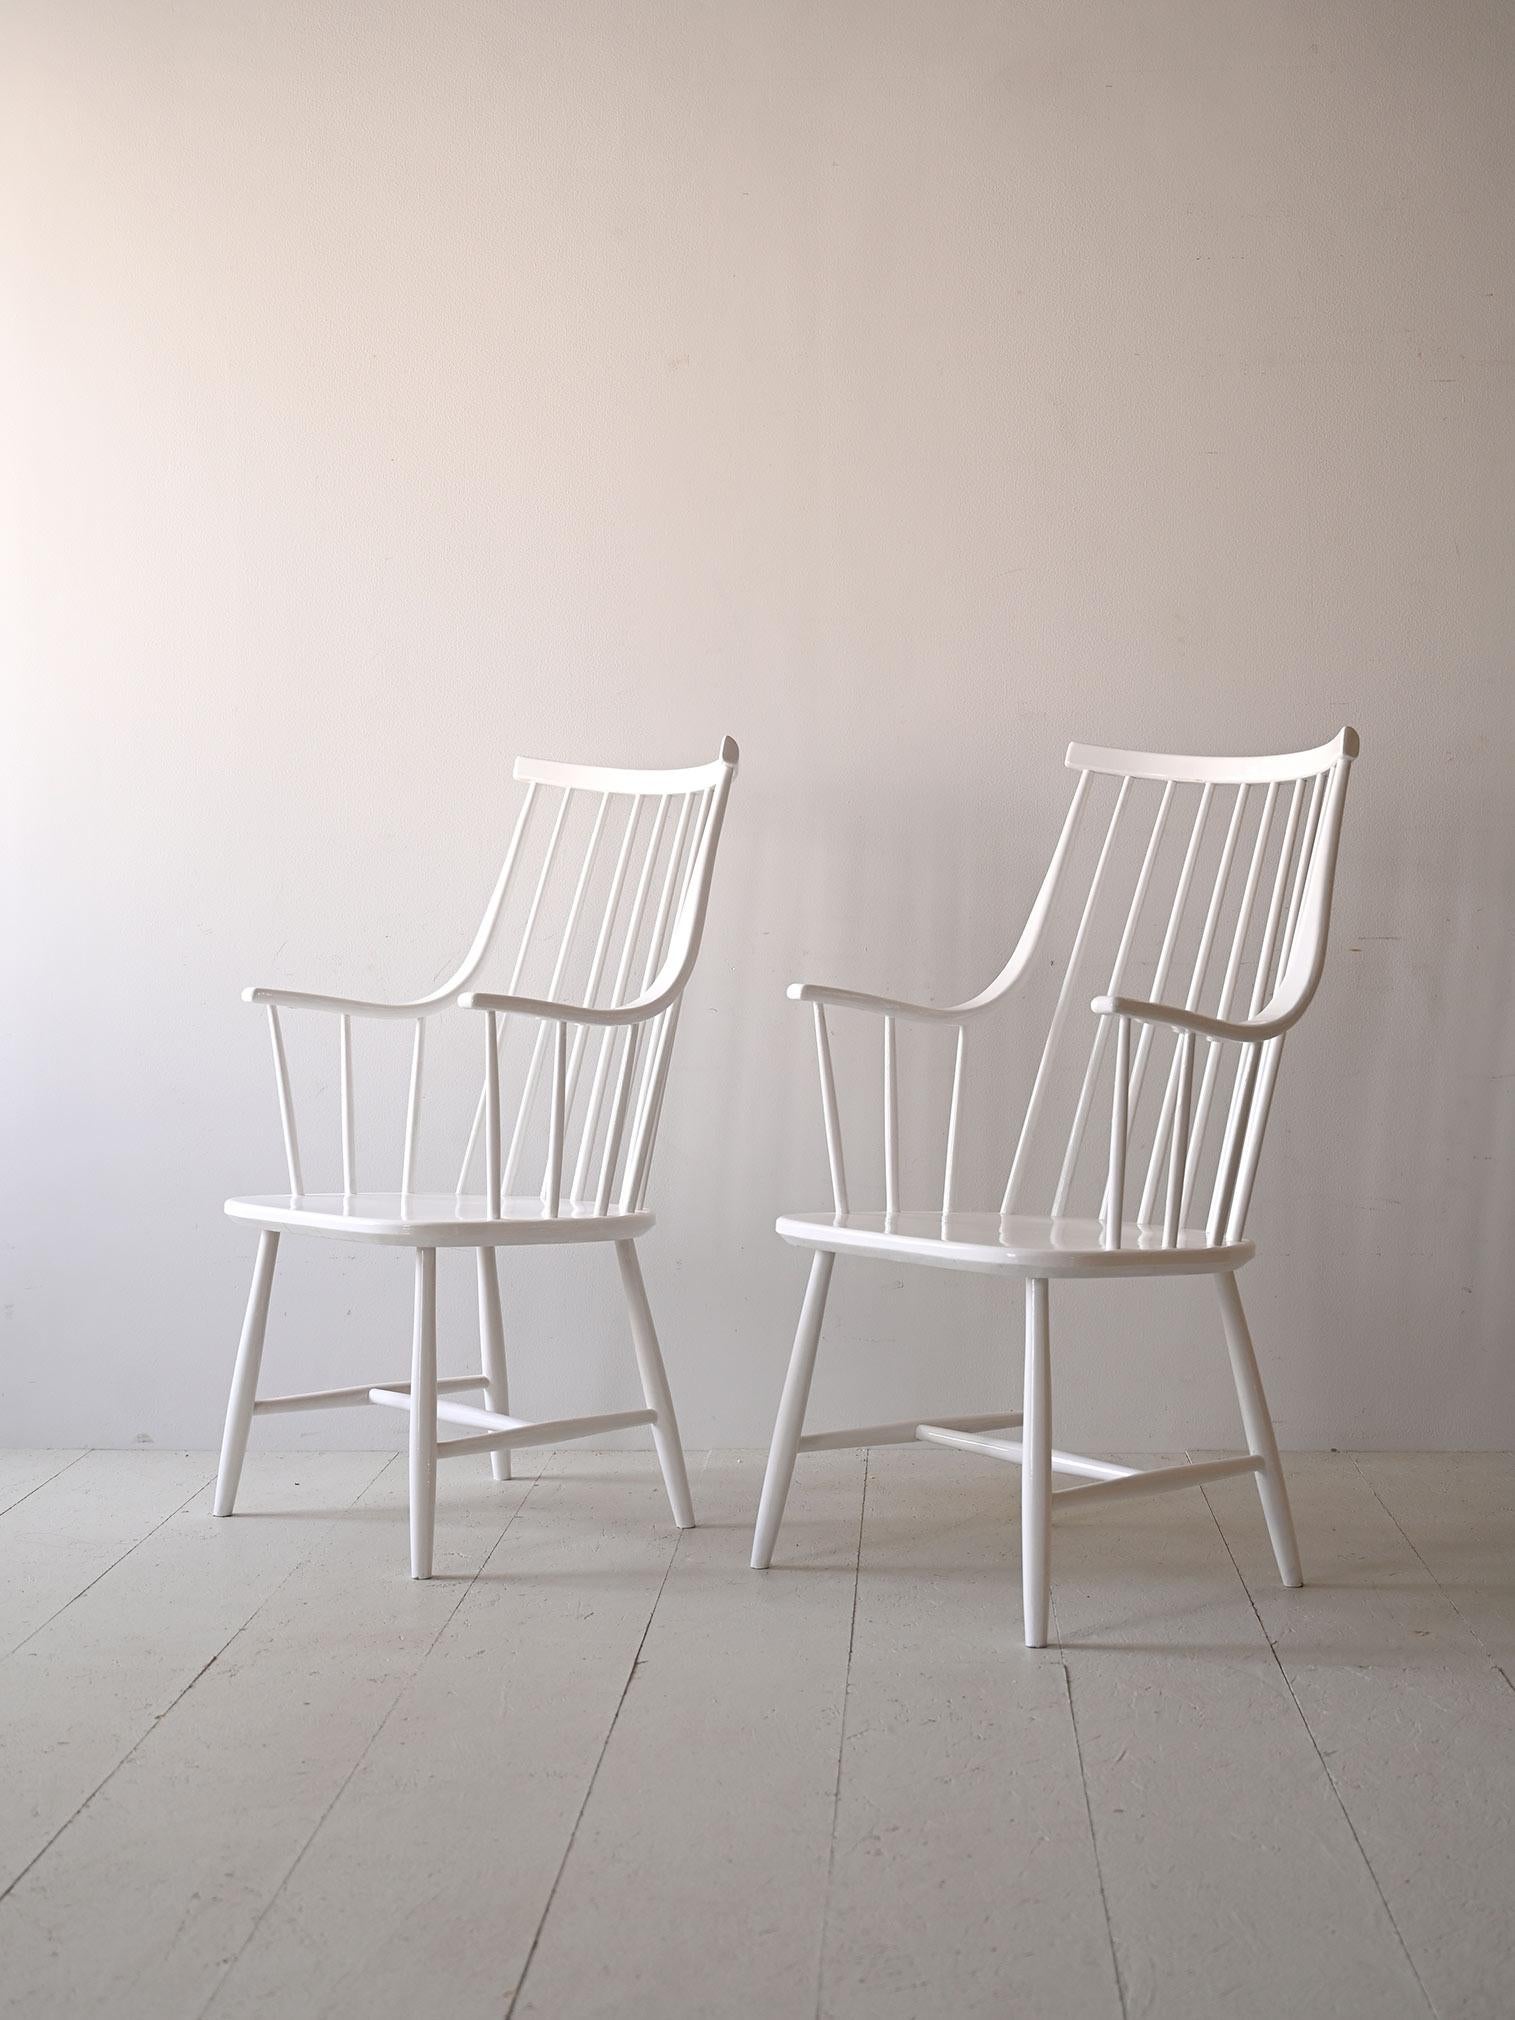 Wooden chairs with original vintage armrests model 'Grandessa' designed by designer Lena Larsson in the 1950s.
The frame is painted white and has the original stamp.

Good condition. A conservative restoration has been done. It may show some signs